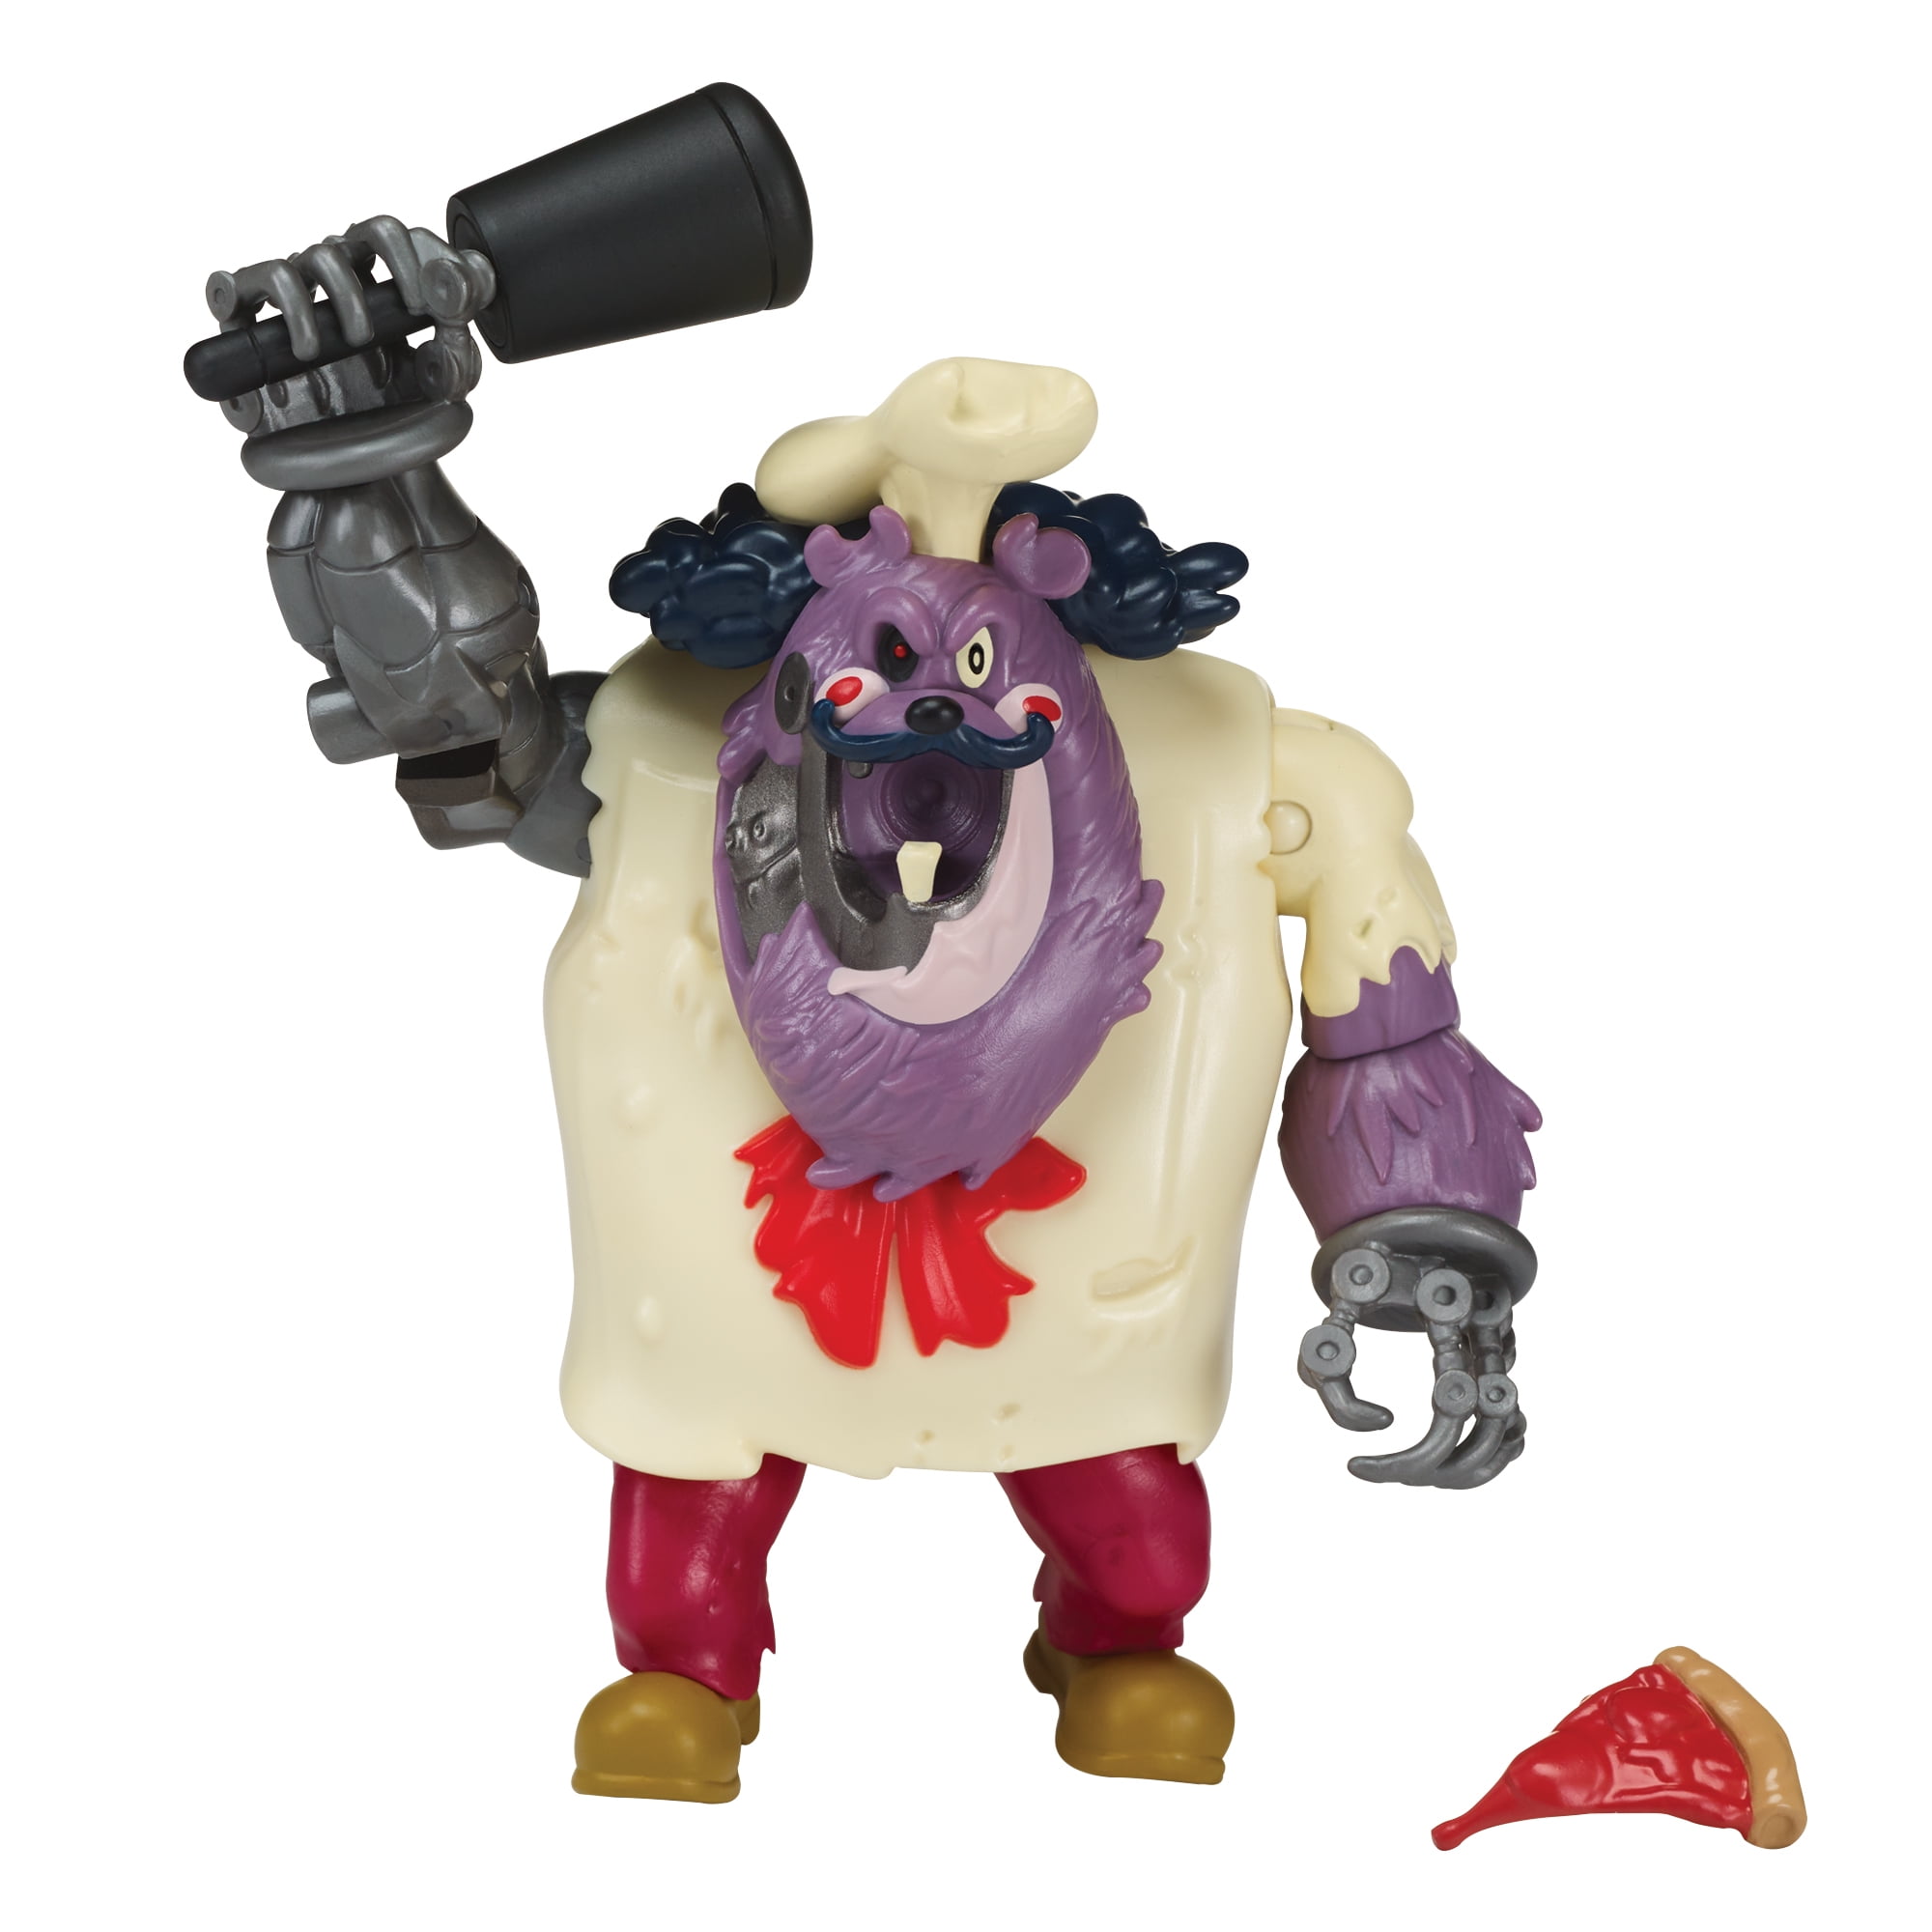 2018 Rise of The Teenage Mutant Ninja Turtles Baron Draxum Action Figure Toy for sale online 